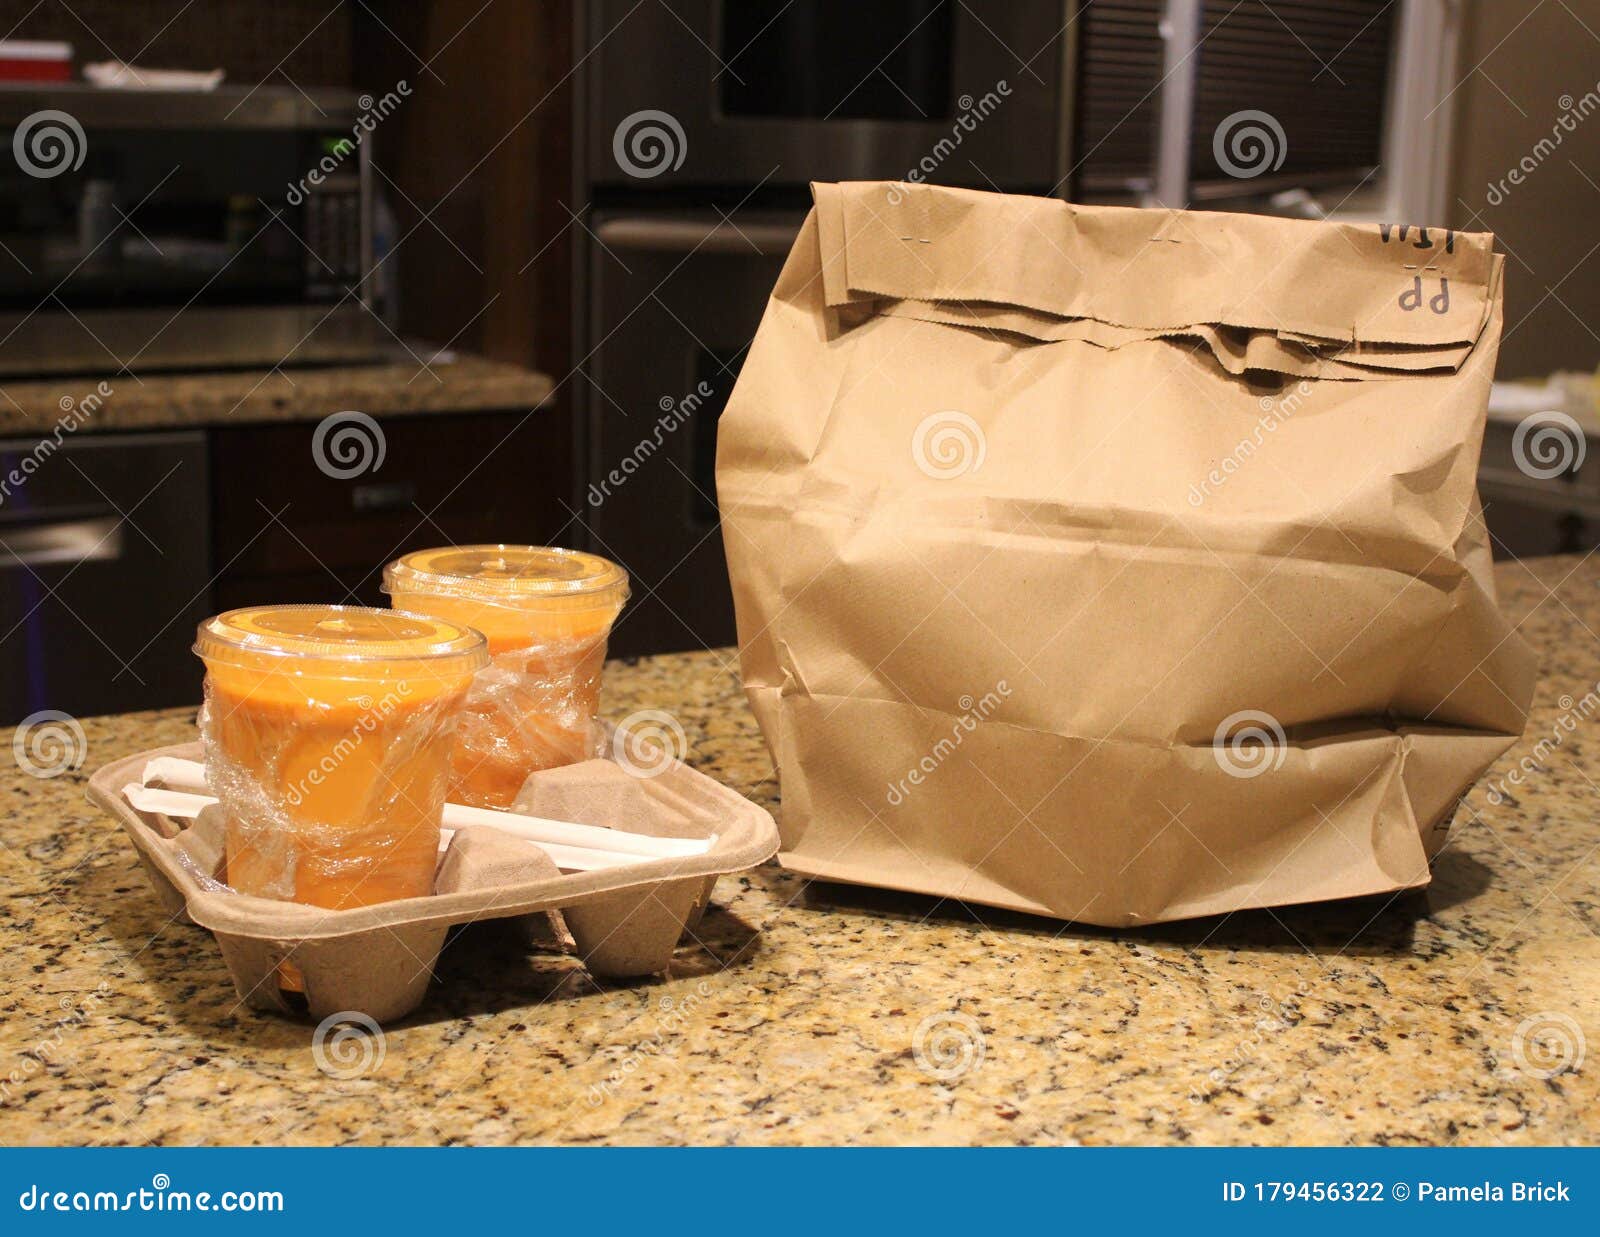 carry out or take away food on a kitchen counter